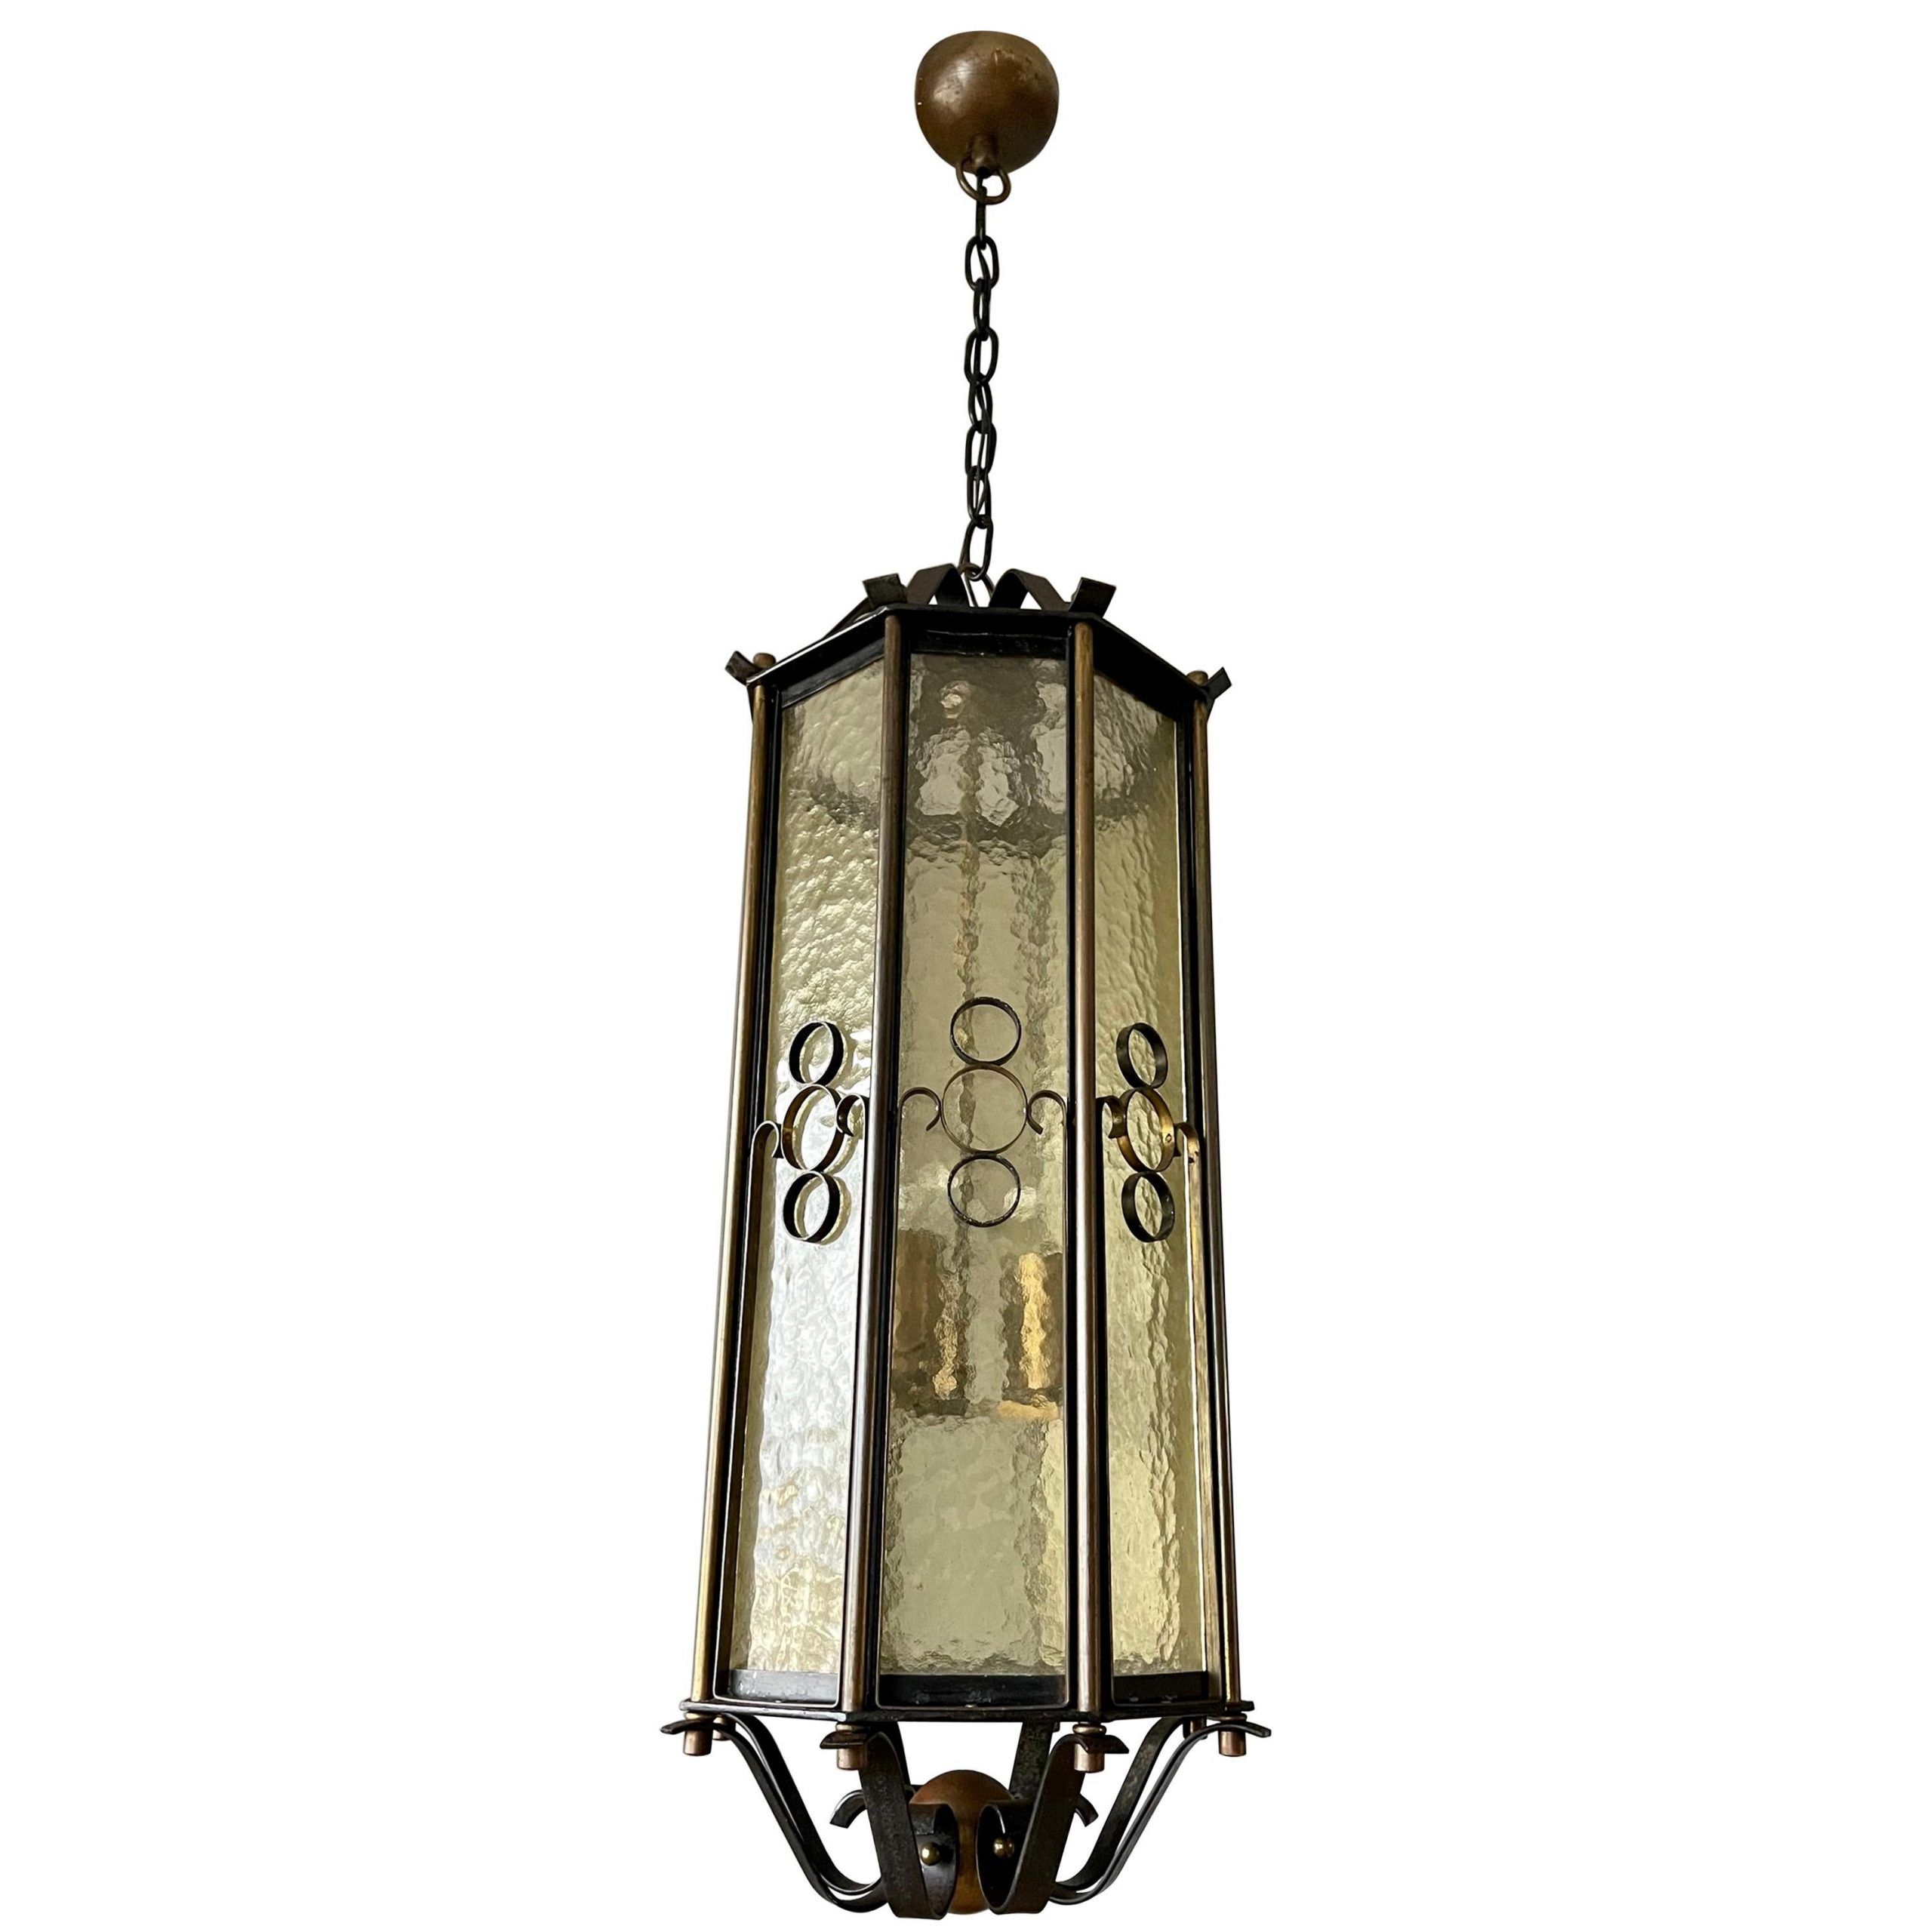 Forged Iron Lantern Chandeliers With Regard To Recent Extra Large Brass And Wrought Iron Lantern / Pendant With Cathedral Glass,  1930s For Sale At 1stdibs (View 8 of 15)